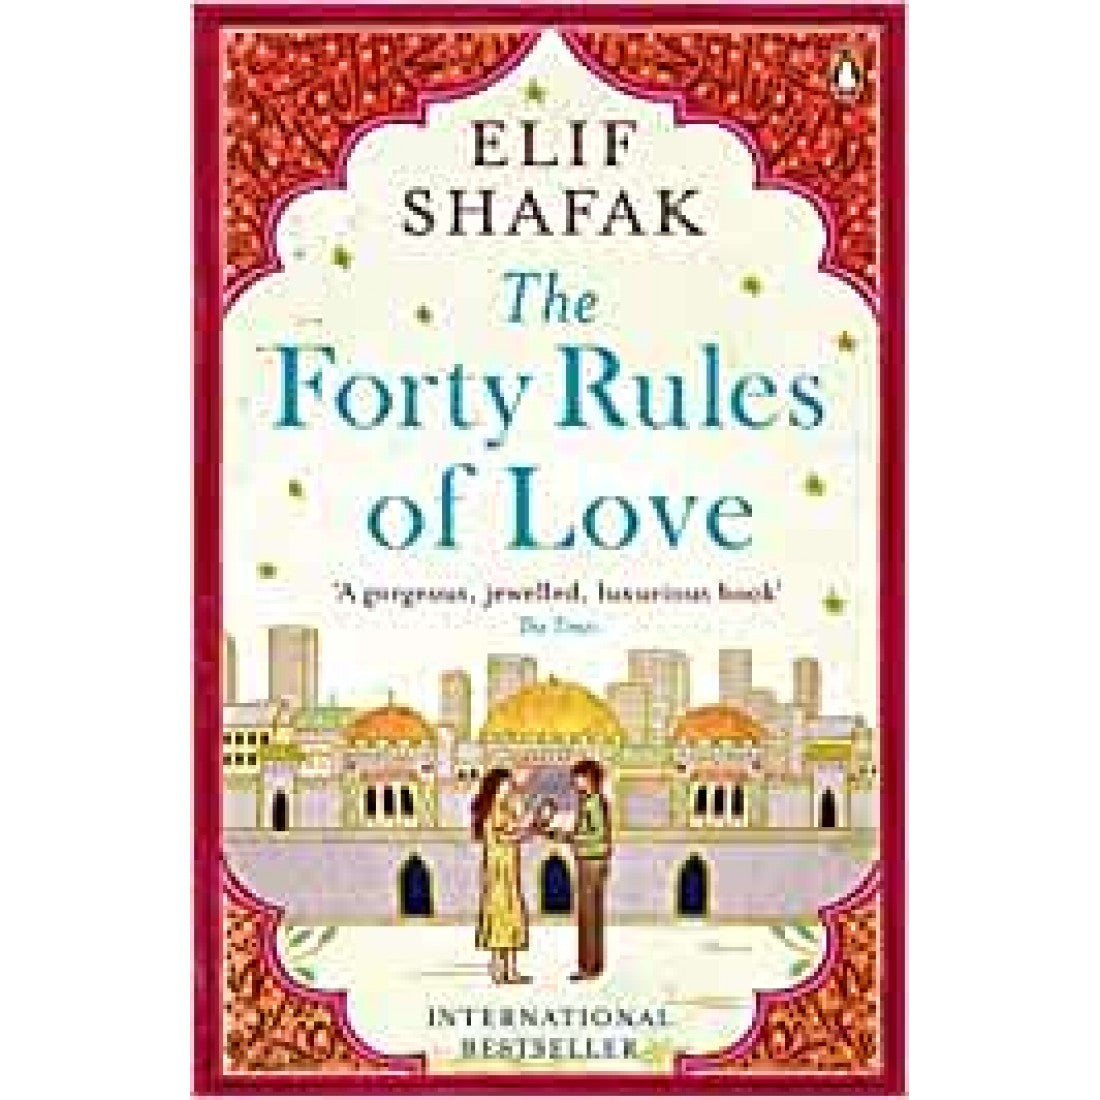 The Forty Rules of Love
Novel by Elif Shafak